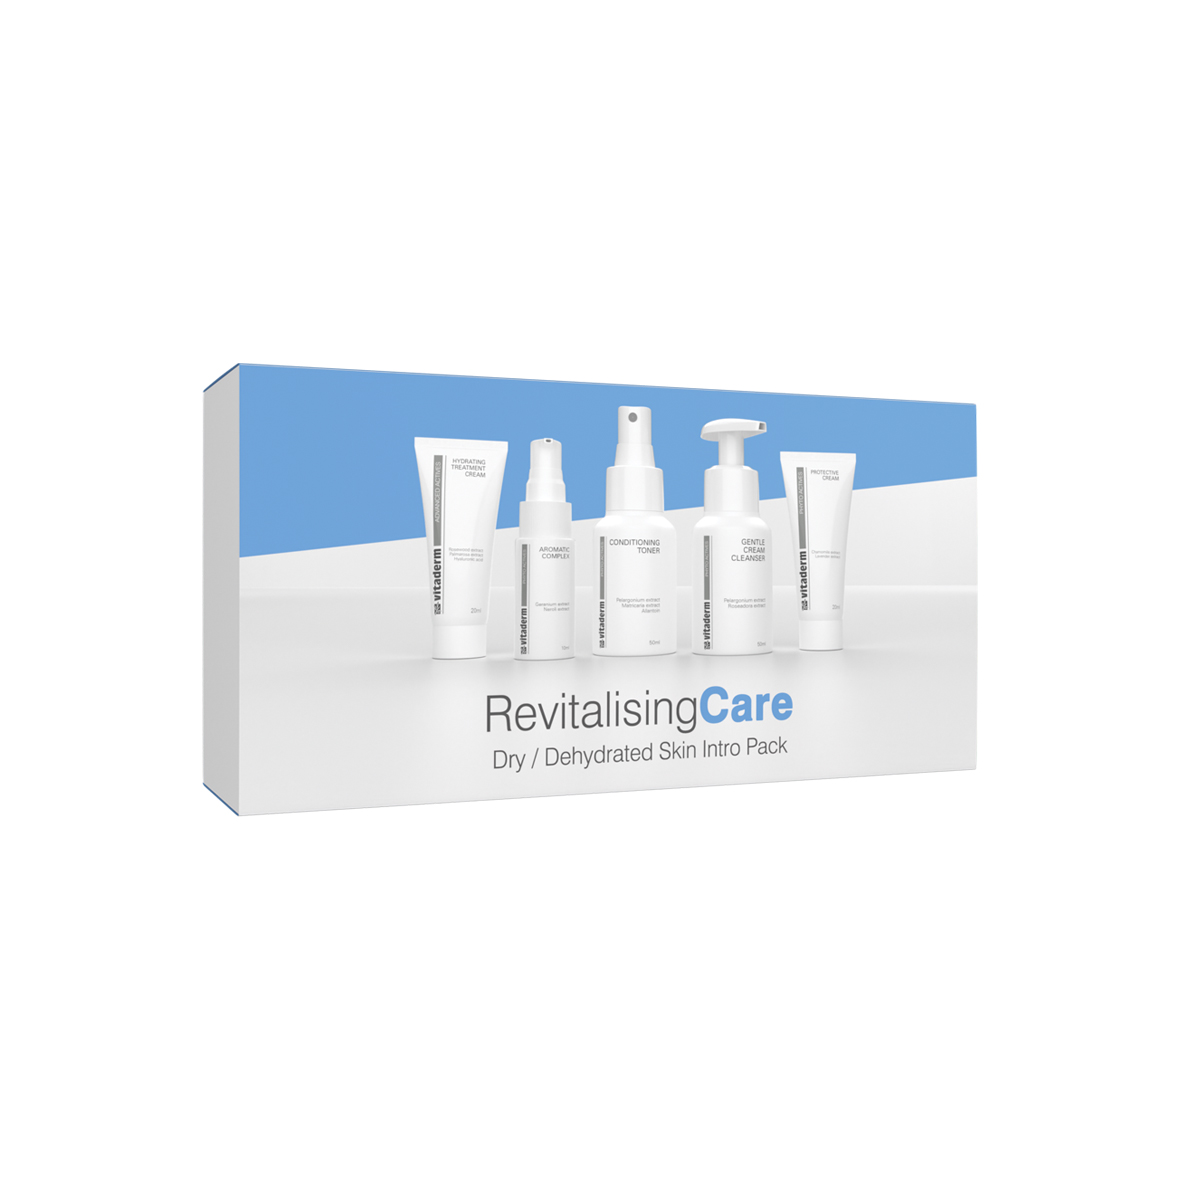 introductory-packsrevitalising-care